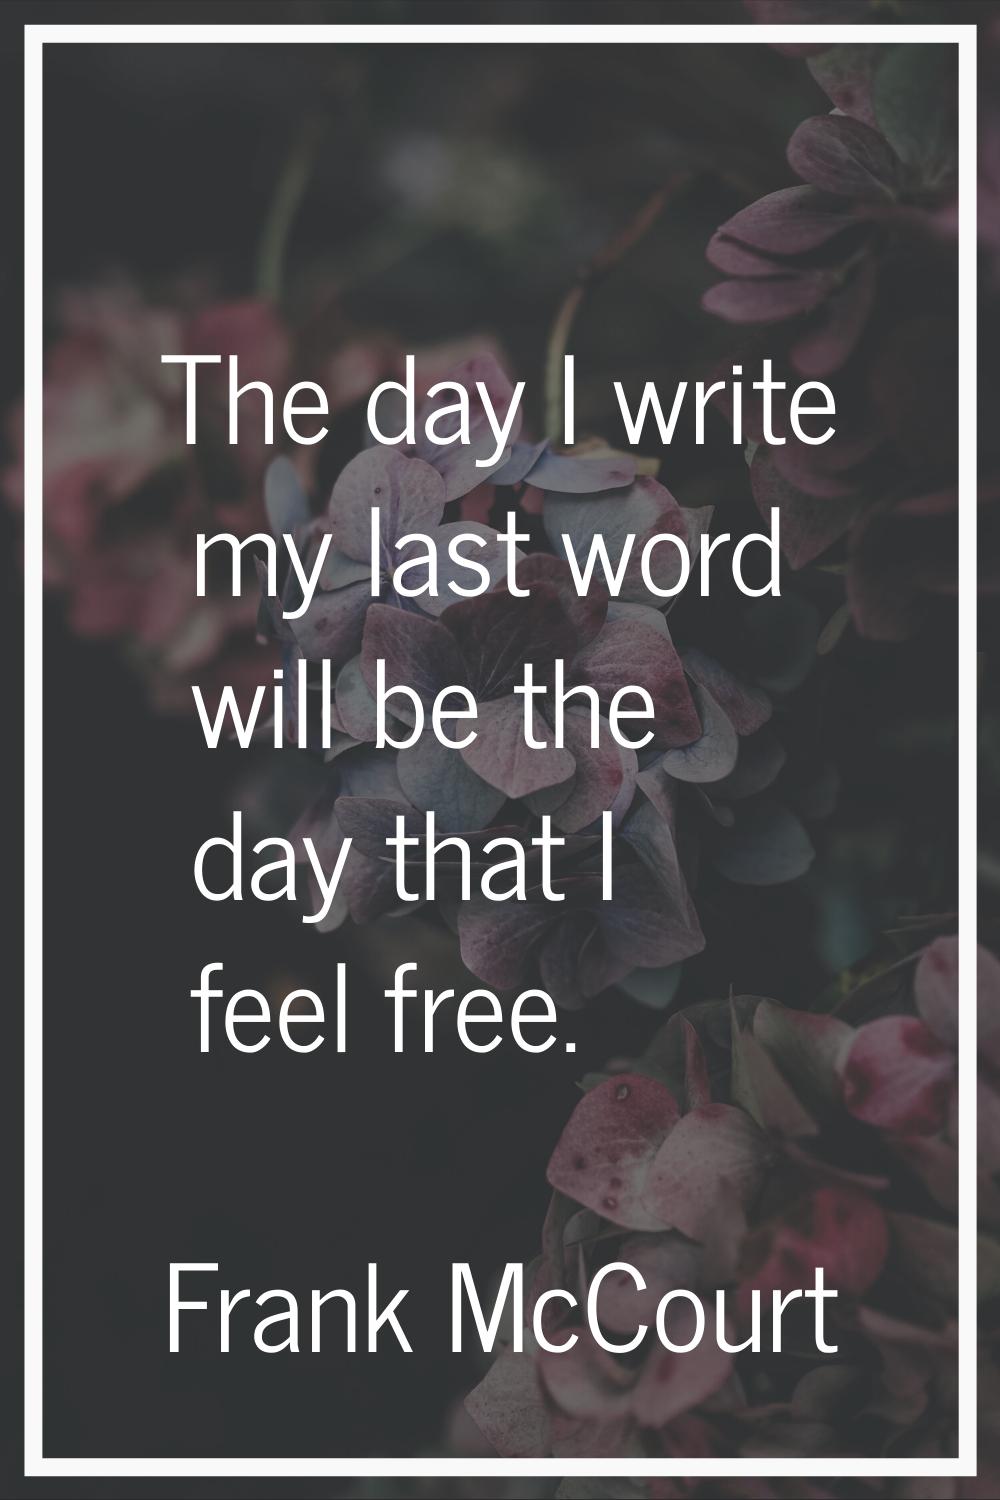 The day I write my last word will be the day that I feel free.